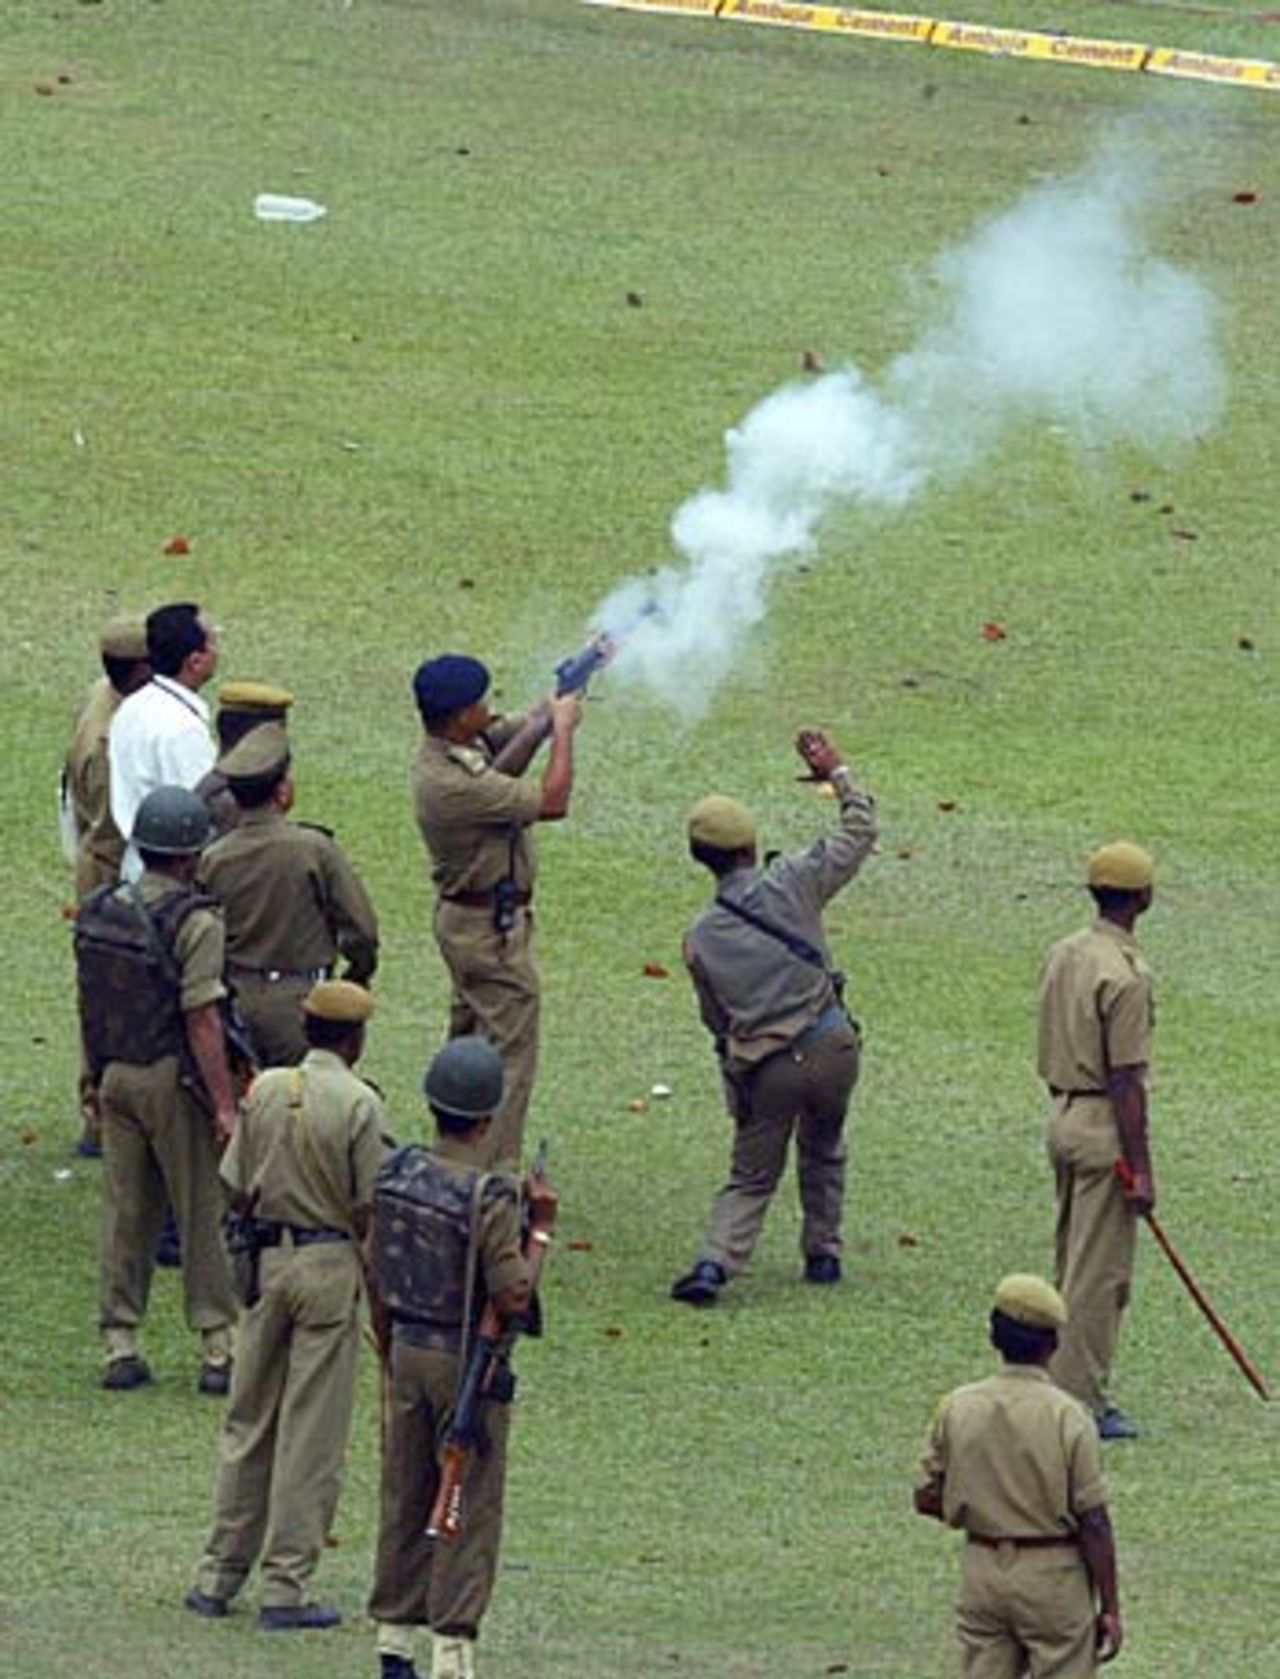 Police fire tear gas into the stands, India v England, 5th ODI, Guwahati,  April 9, 2006